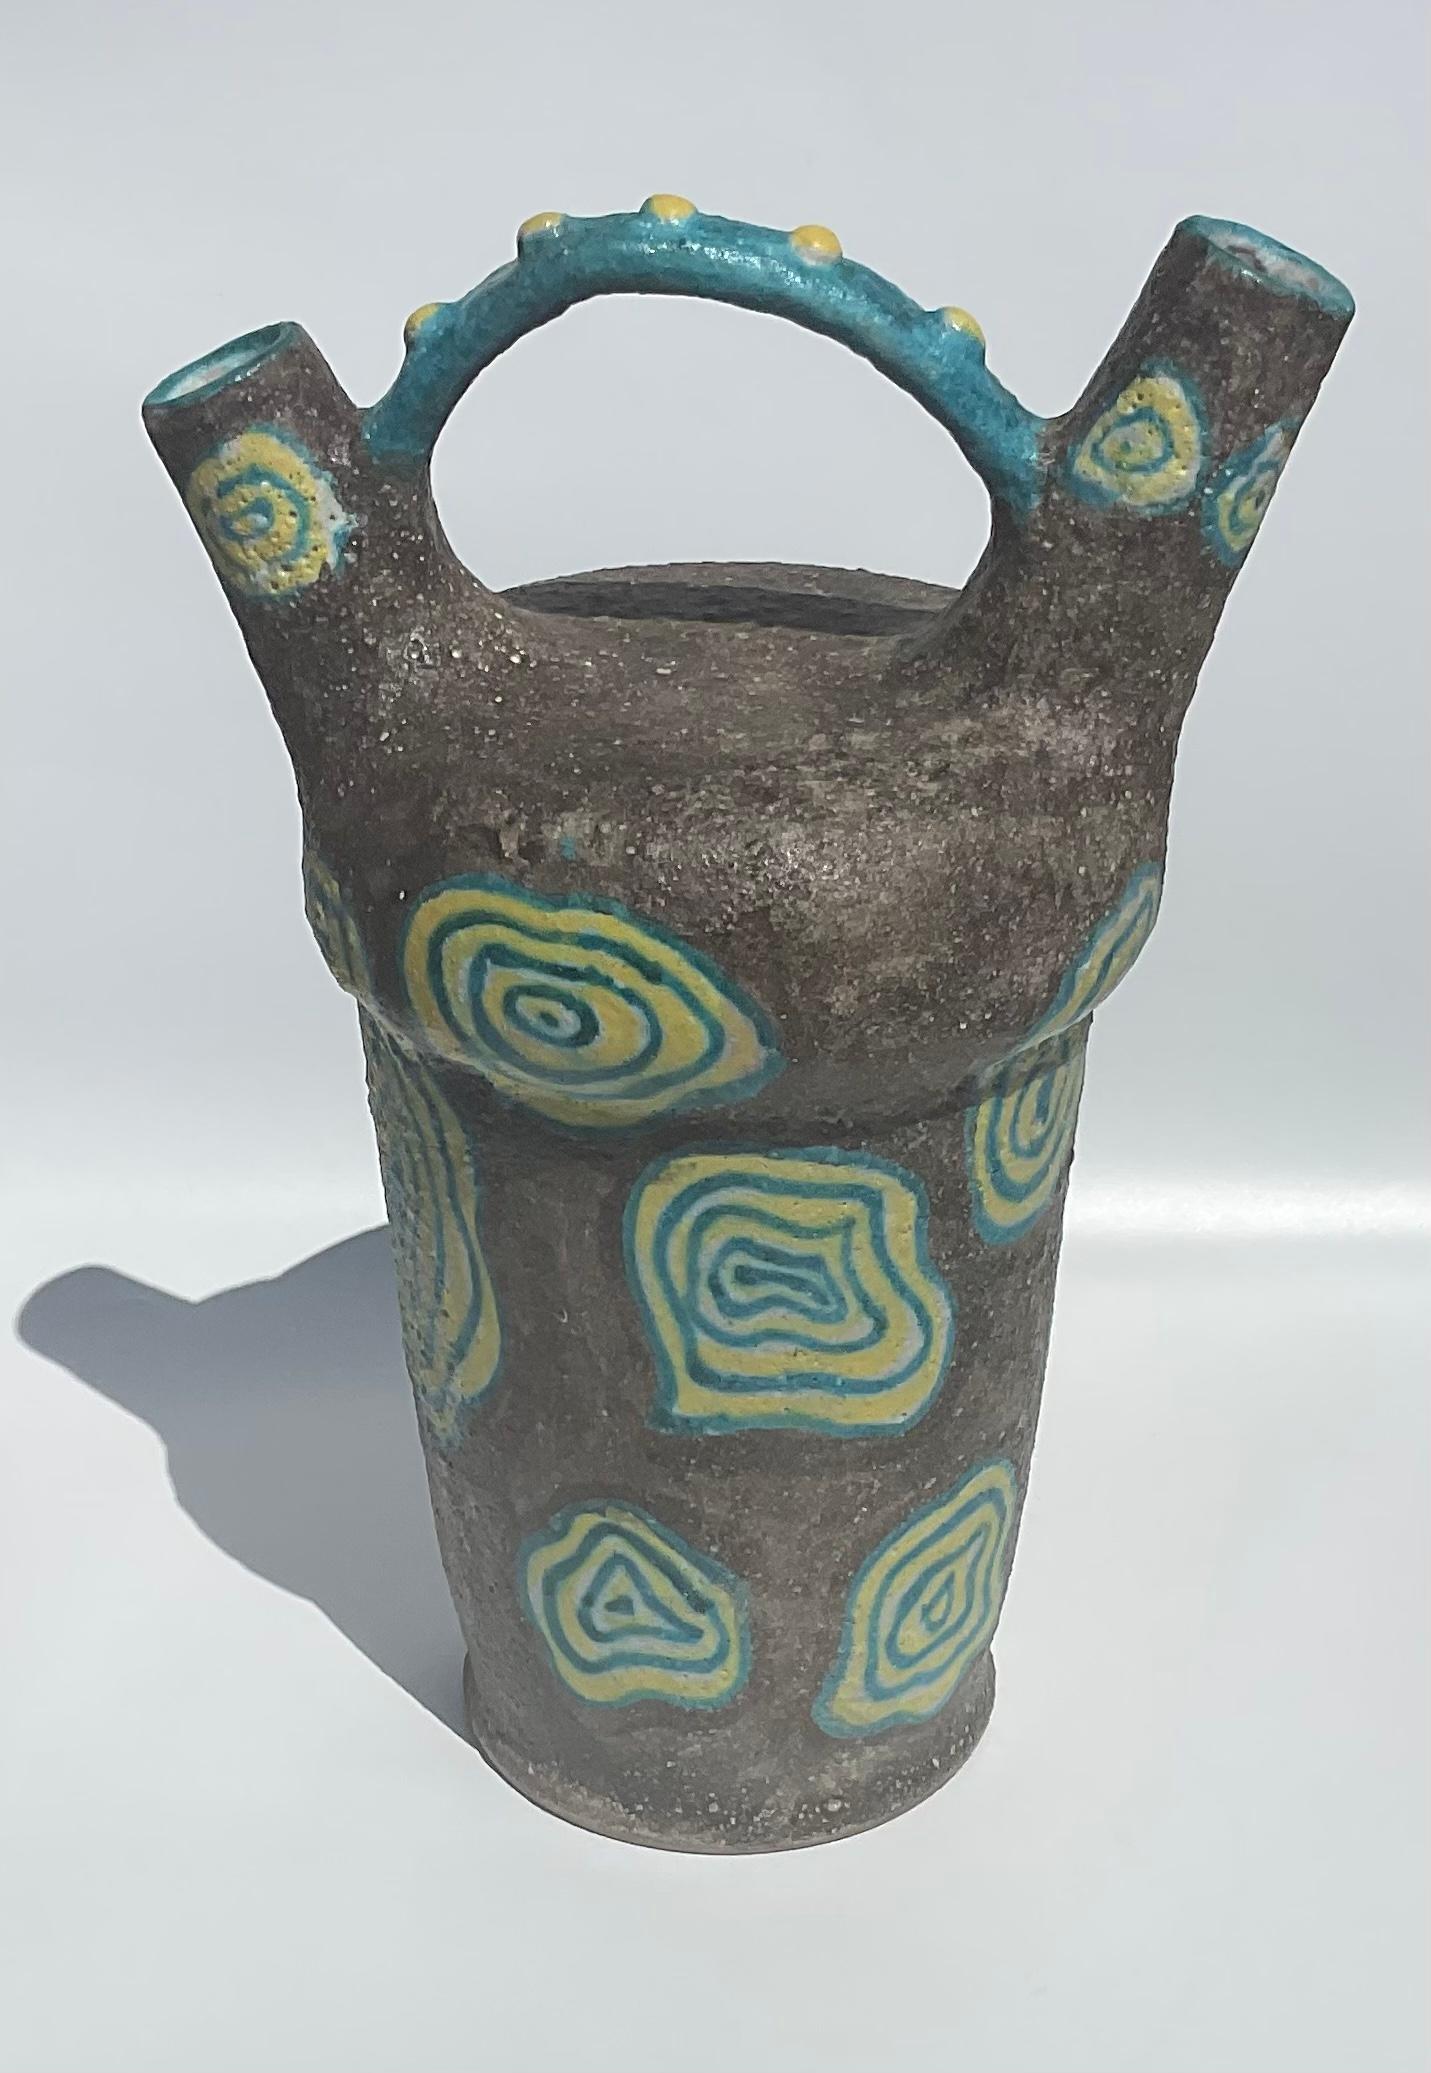 Volcanic Lava Glaze Mid-Century Modern Dual spout LARGE Italian Pottery Vase With spiral decoration. Signed by the artist as pictured. This piece fits in with all iconic designer Italian pottery pieces by Guido Gambone, and Marcello Fantoni, in